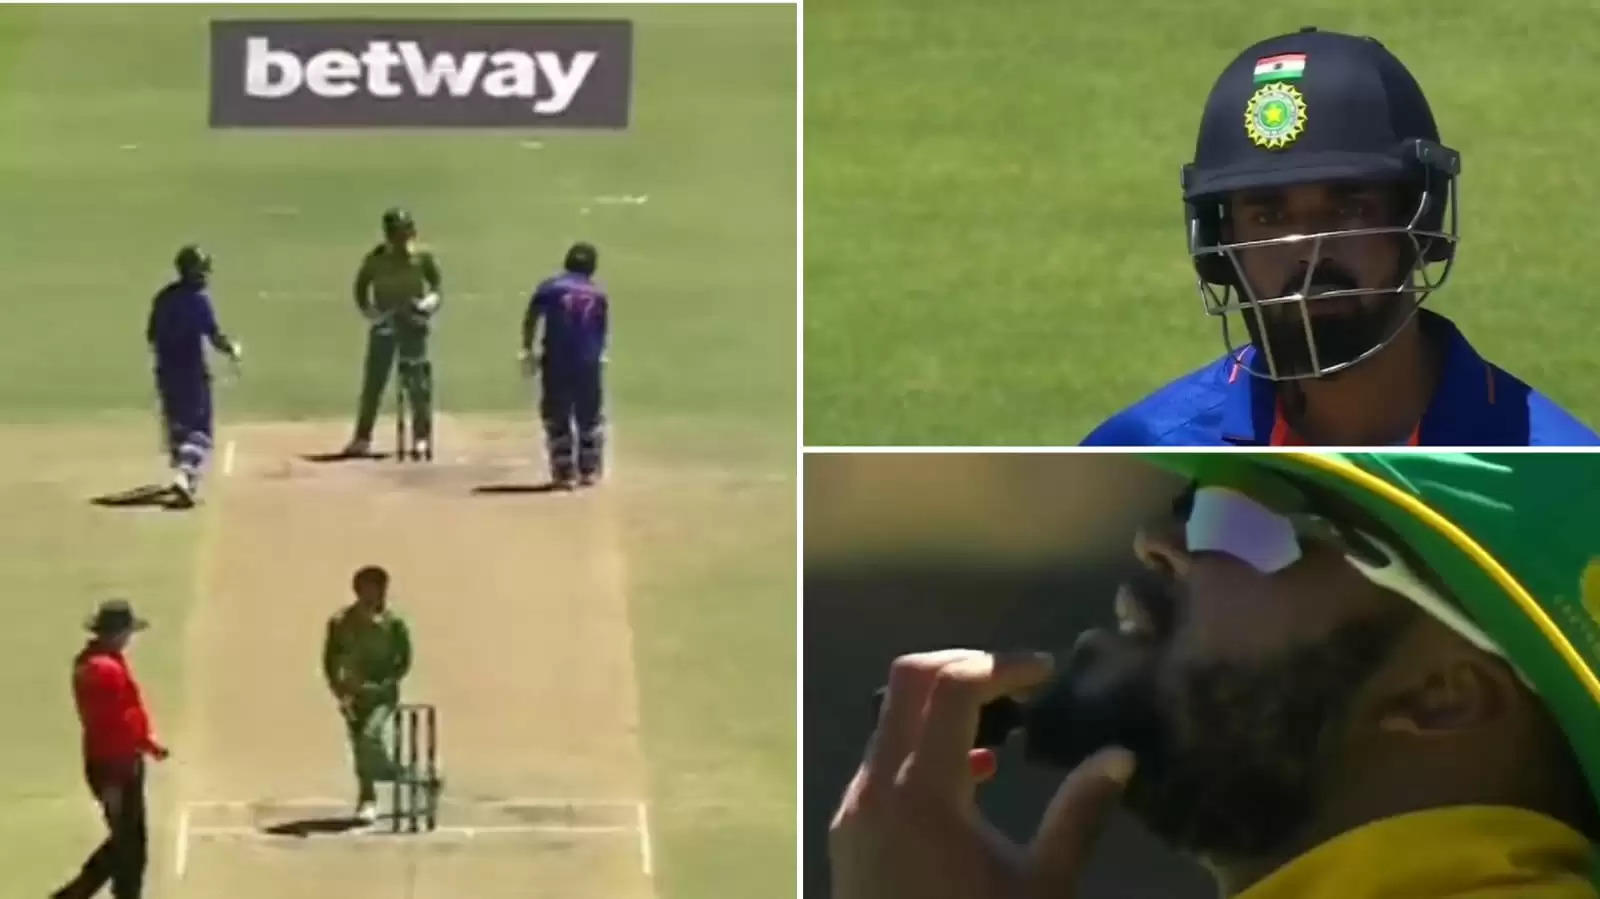 WATCH: Village cricket from India and South Africa – huge run out opportunity missed after horrible backing up